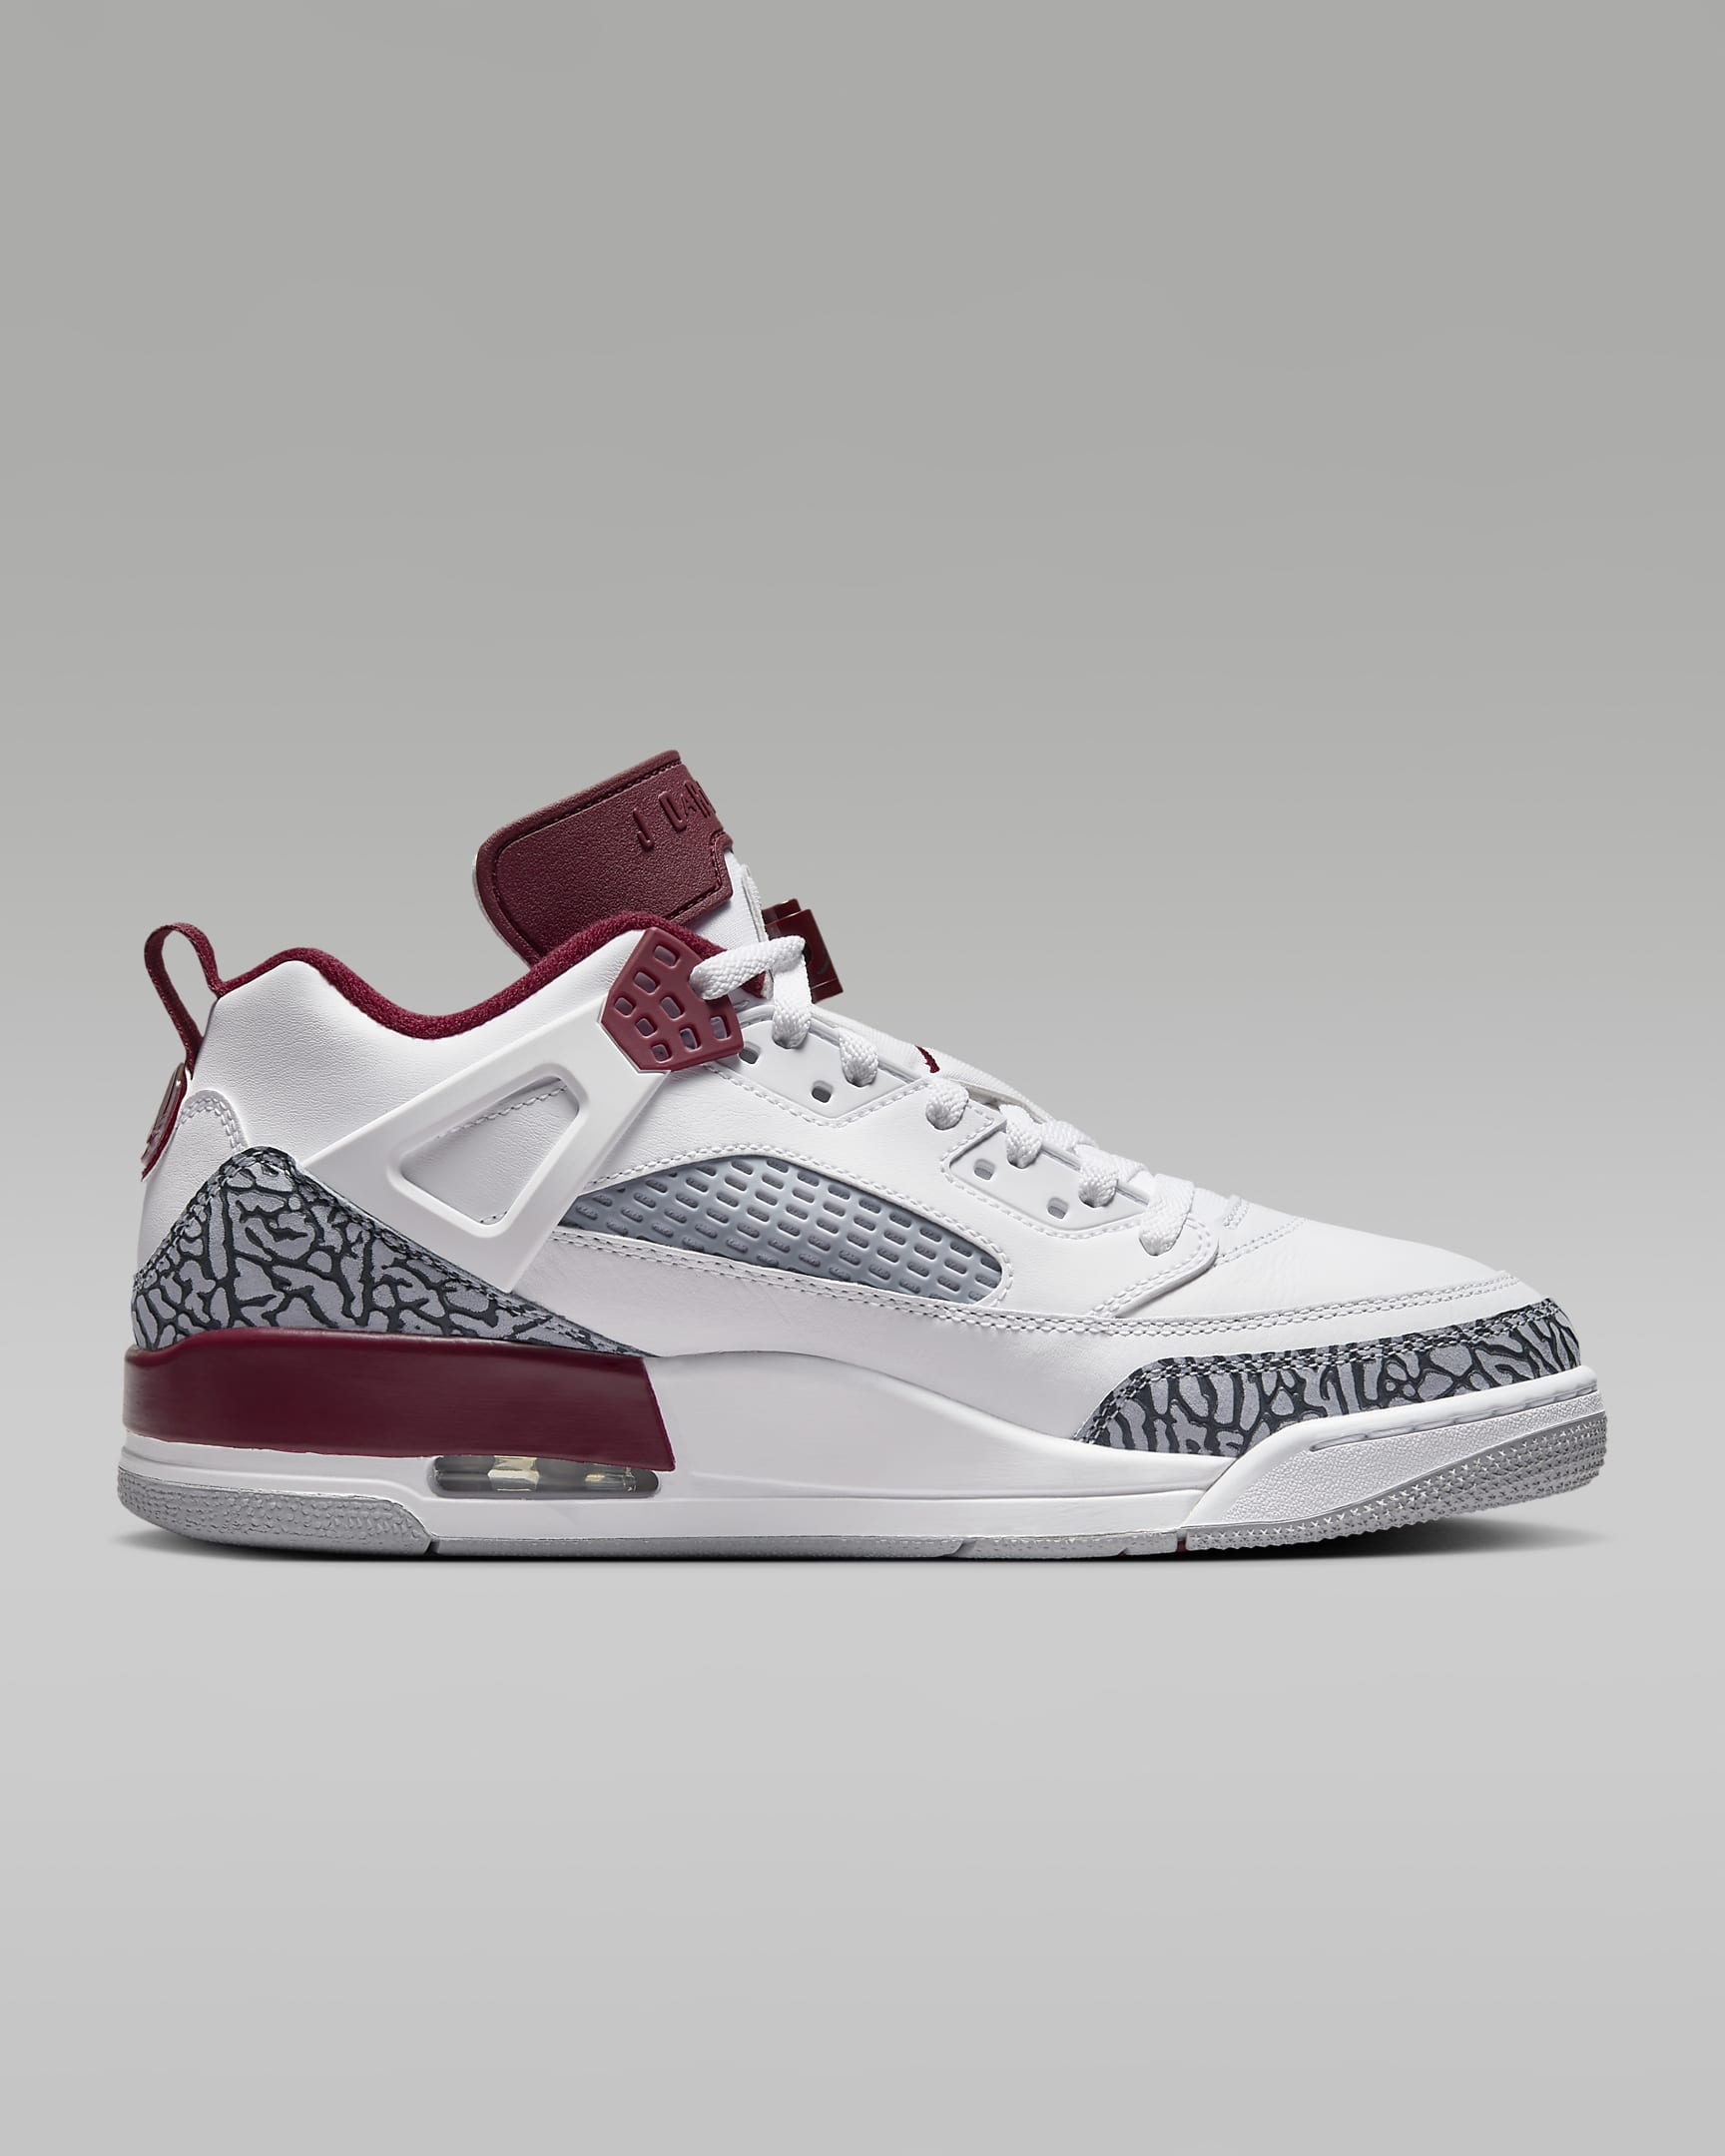 Jordan Spizike Low Men's Shoes - White/Wolf Grey/Anthracite/Team Red